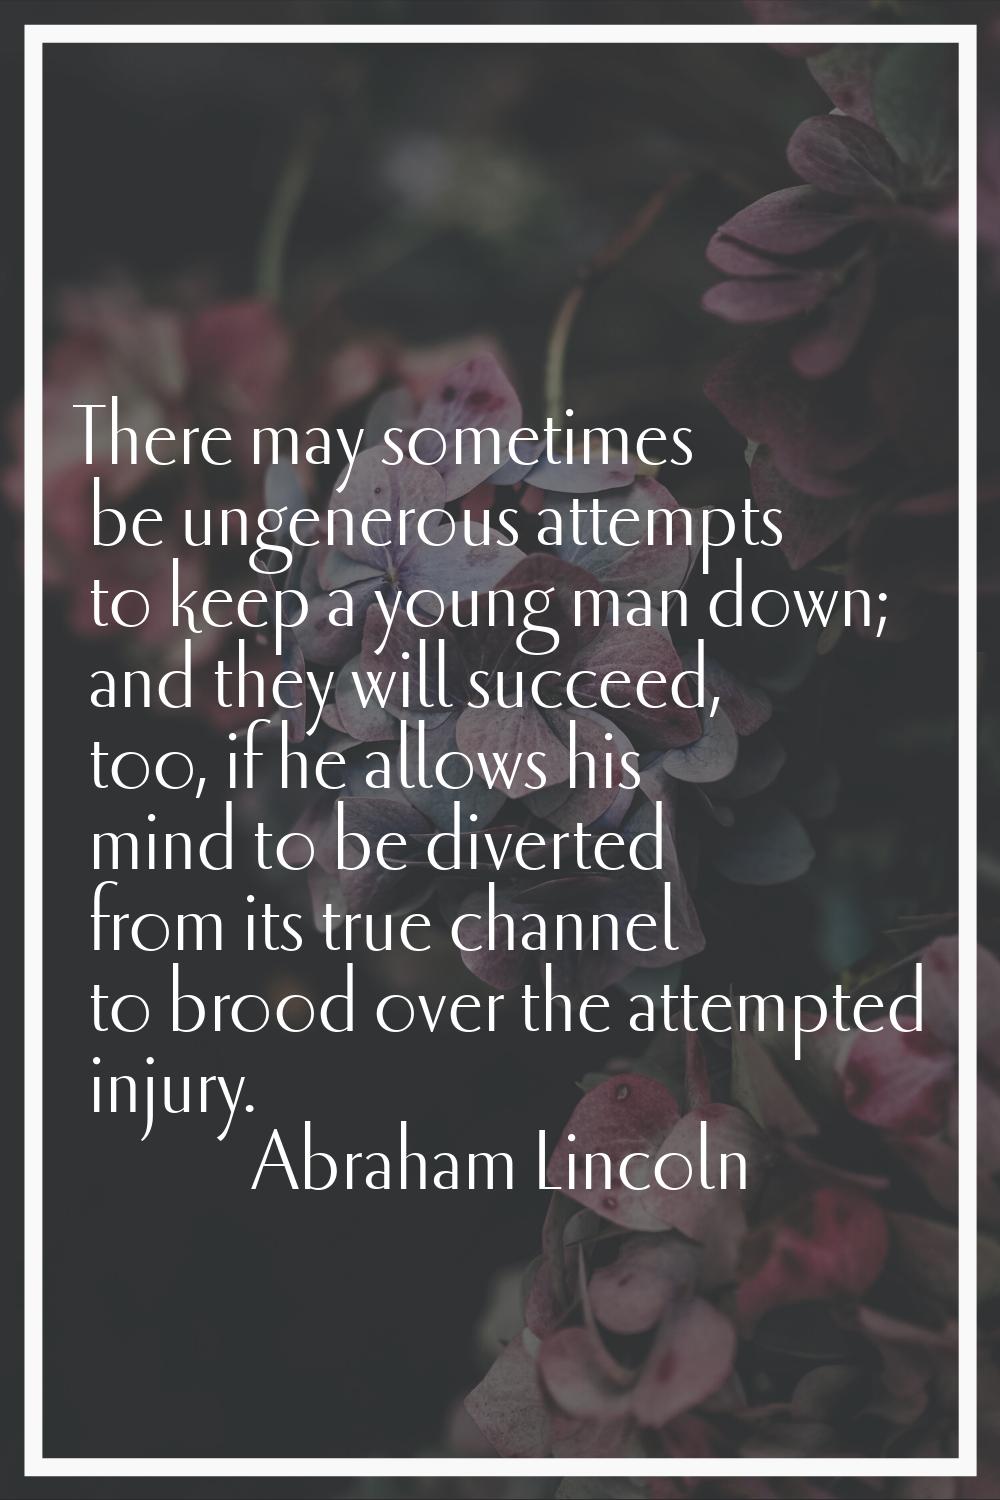 There may sometimes be ungenerous attempts to keep a young man down; and they will succeed, too, if